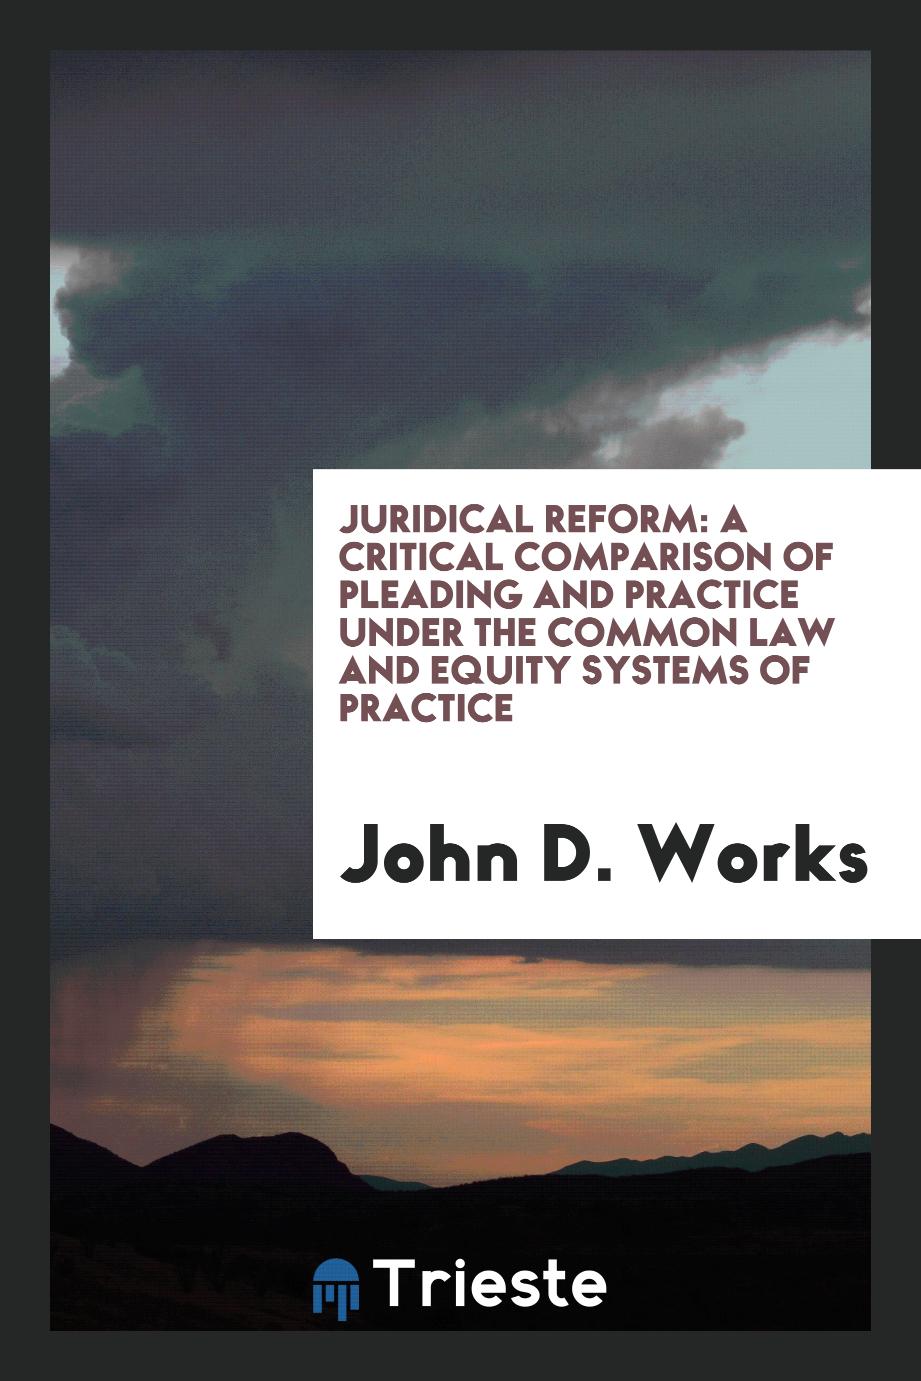 Juridical reform: a critical comparison of pleading and practice under the common law and equity systems of practice